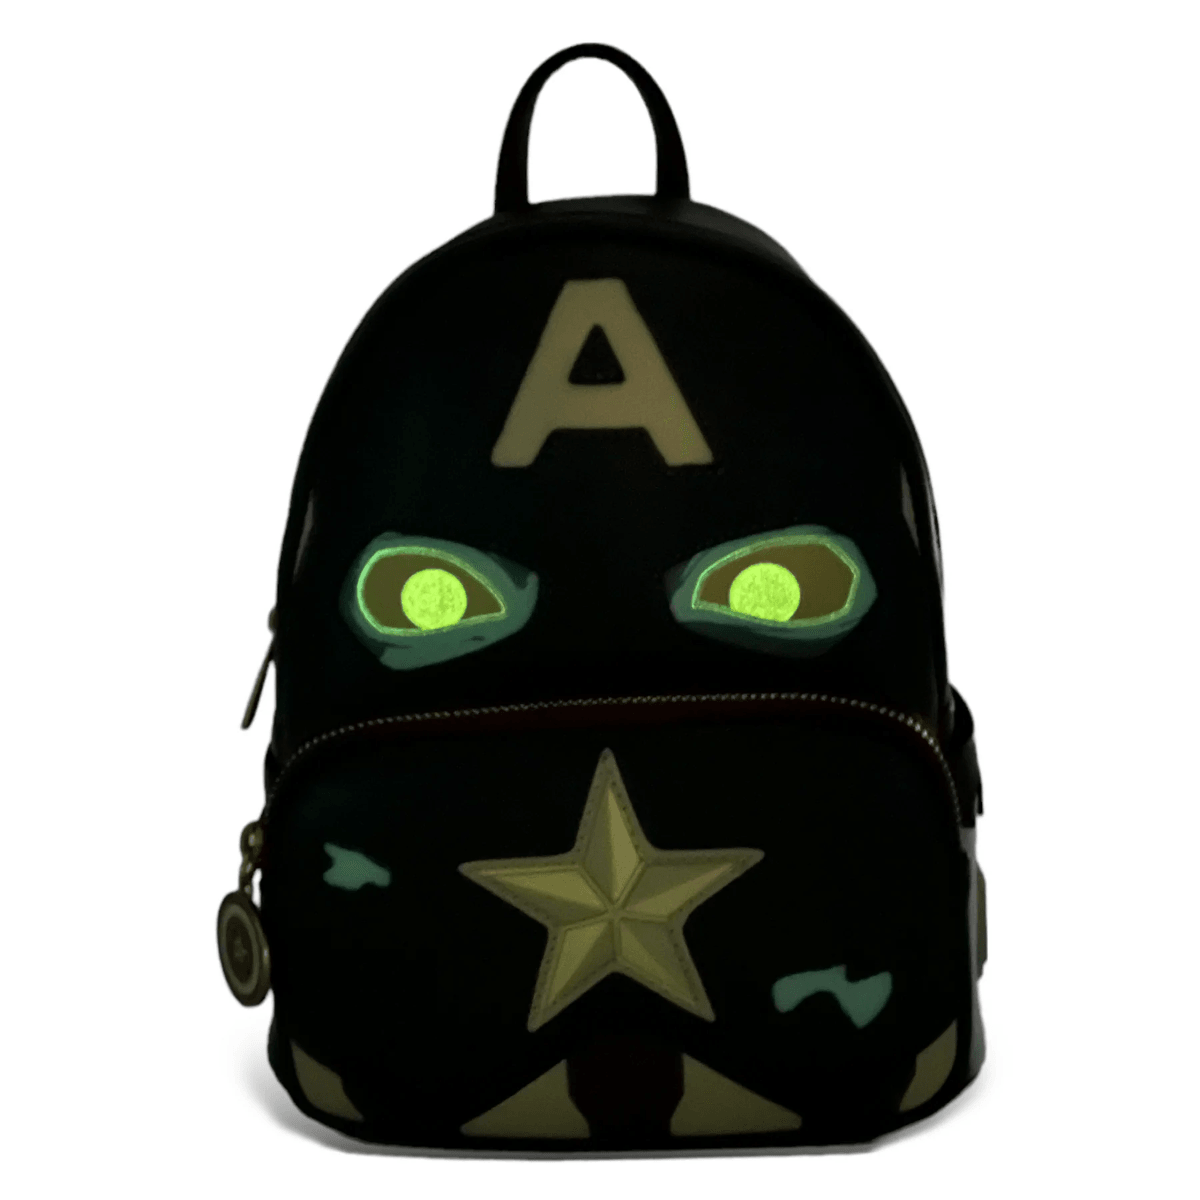 LOUMVBK0227 What If - Zombie Captain America Backpack - Loungefly - Titan Pop Culture